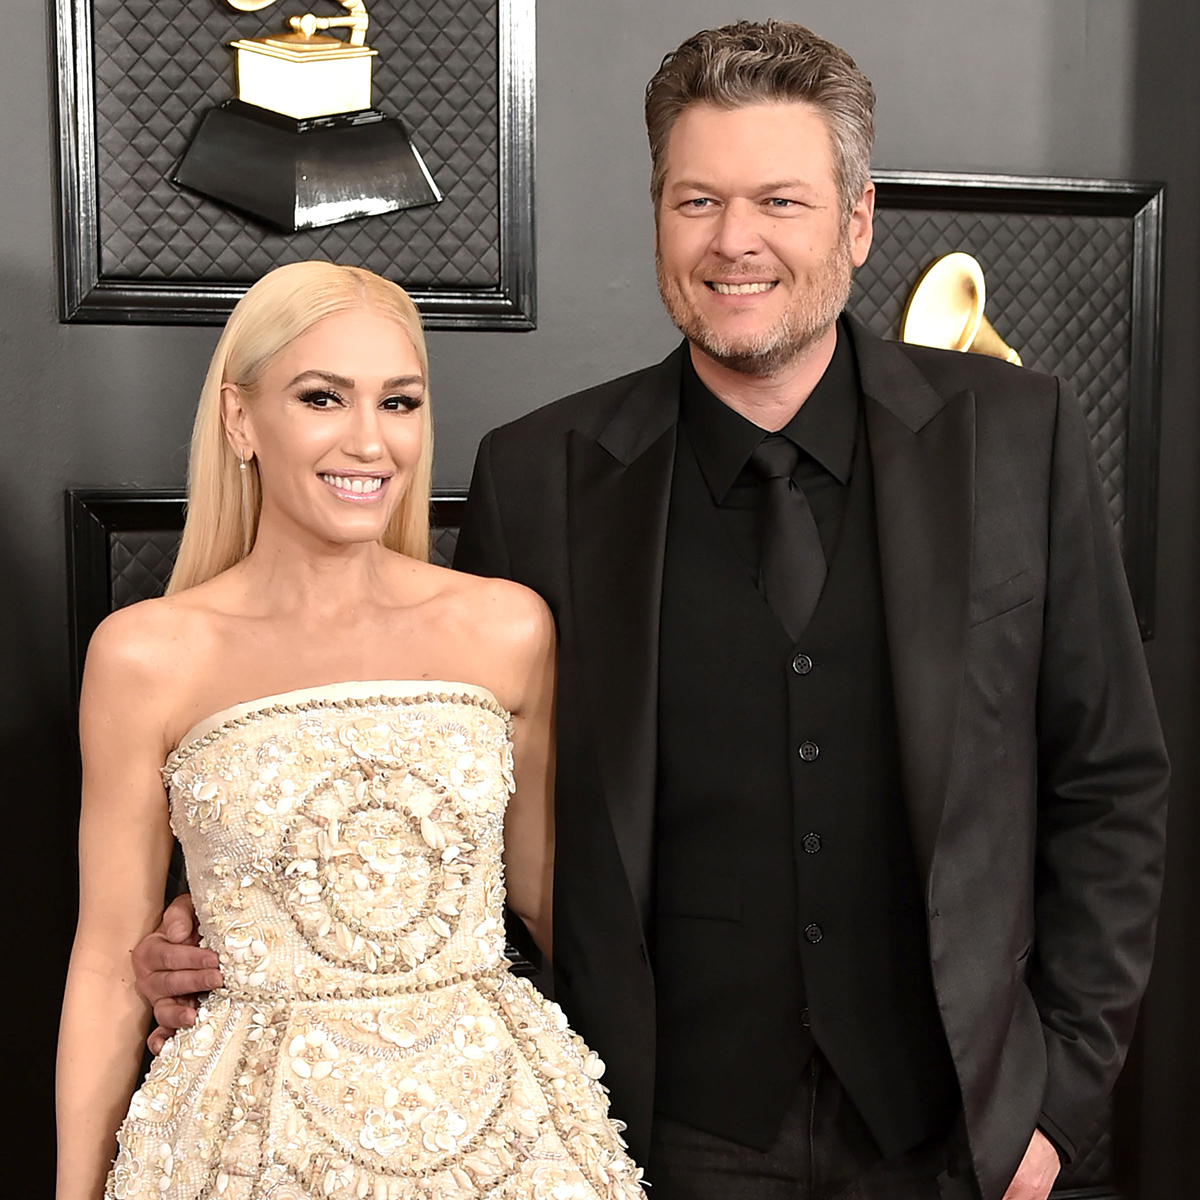 Gwen Stefani Reveals Her and Blake Shelton’s Bathroom Is Decorated With Tabloid Covers – E! Online